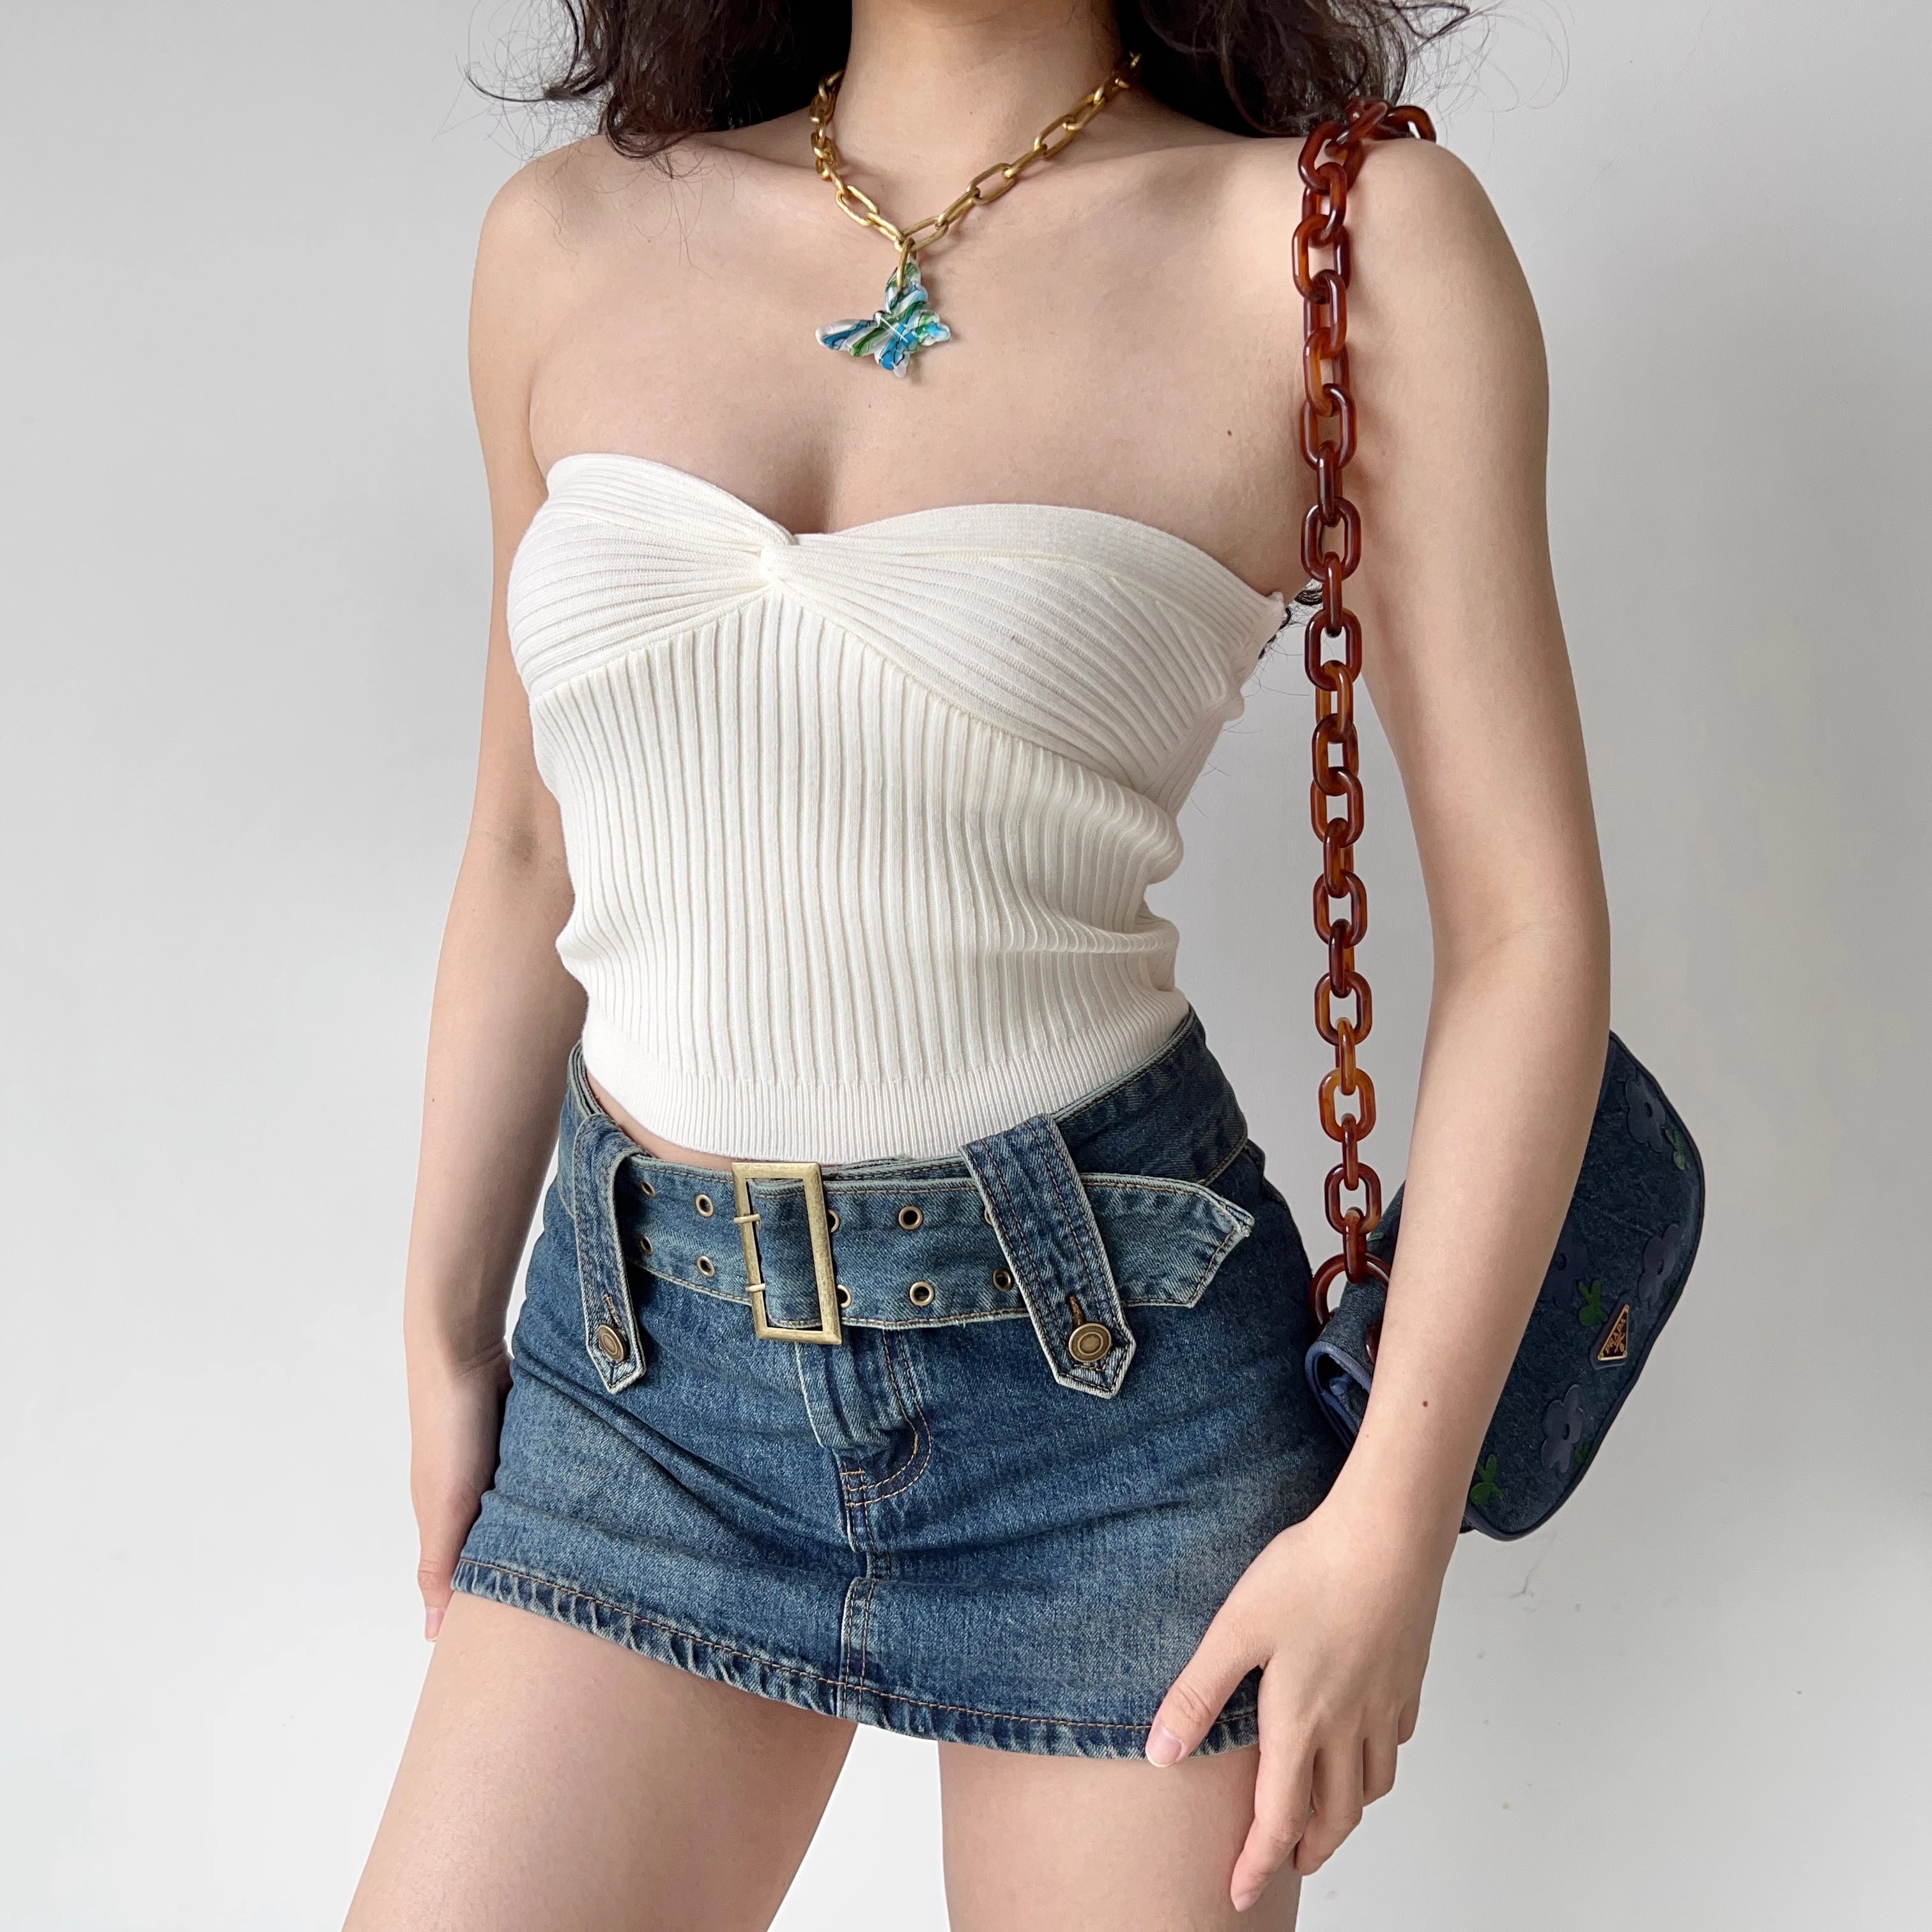 Go Girl Go European and American Style Sexy Chest Knotted Stretch Knit Tube Top Women's Outerwear Short Vest